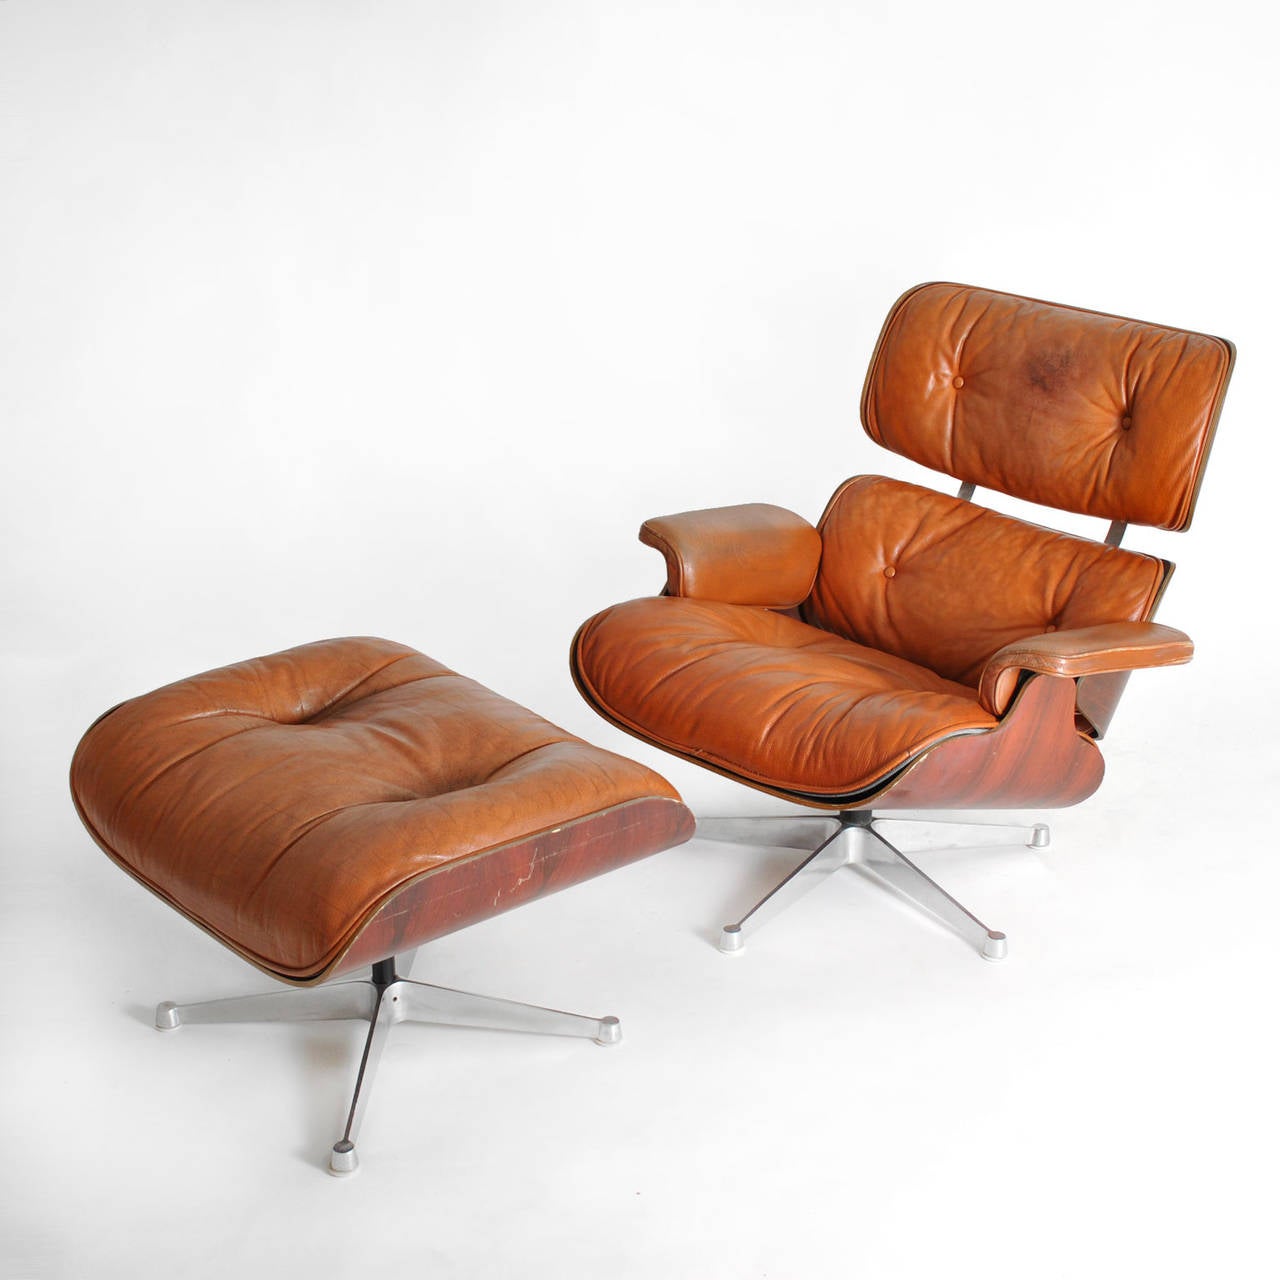 Lounge Chair and Ottoman designed by Charles and Ray Eames and Herman Miller edited by the late fifties , made of plywood , finished in rosewood , original cognac-colored leather upholstery . Steel legs with feet finished in pill. 
USA 1950